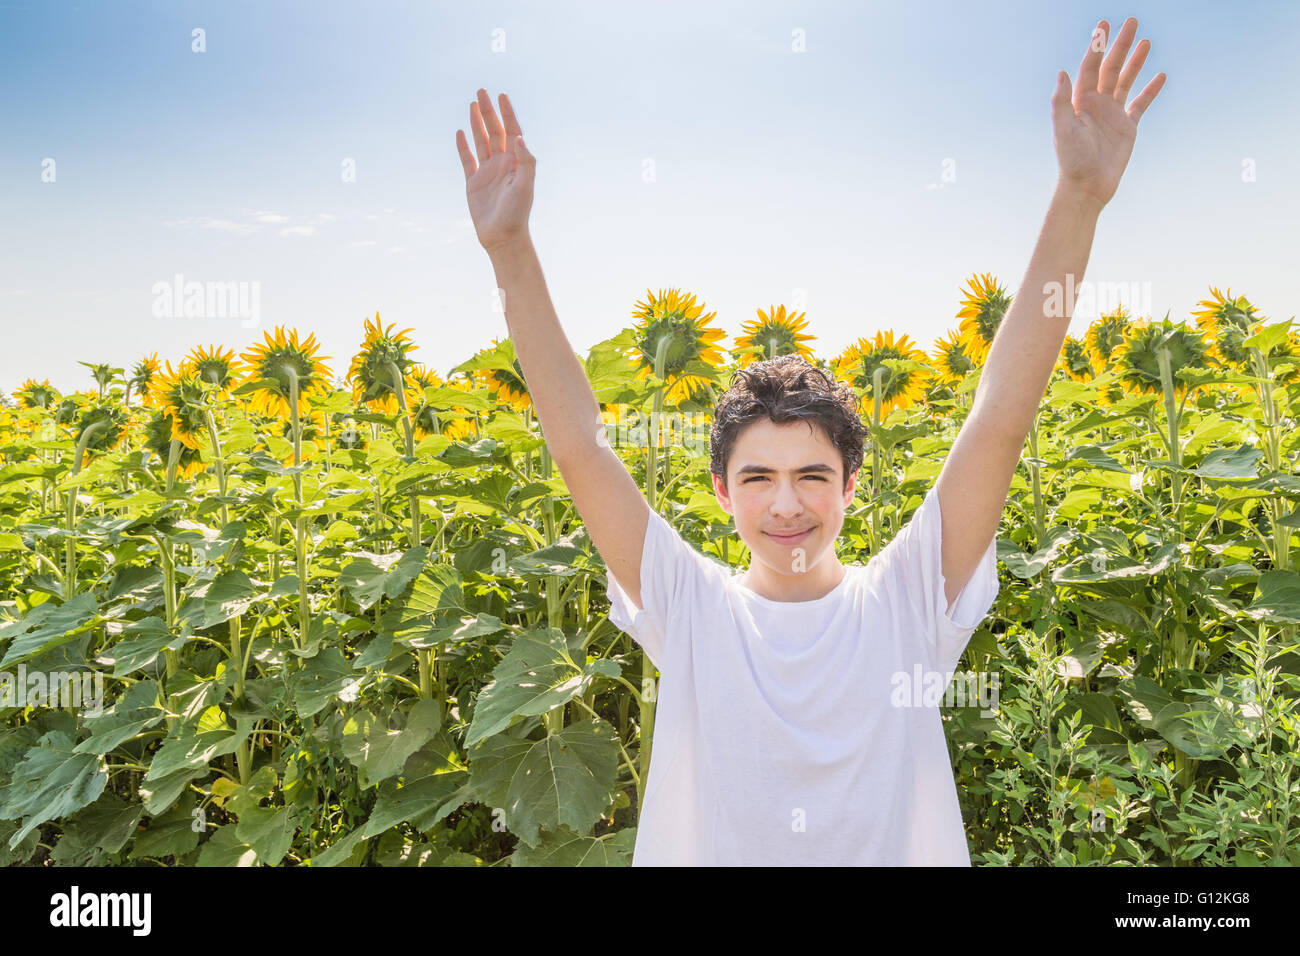 Open air and open arms – Caucasian boy is raising his arms in front of yellow sunflower fields during summer in Italian countryside Stock Photo